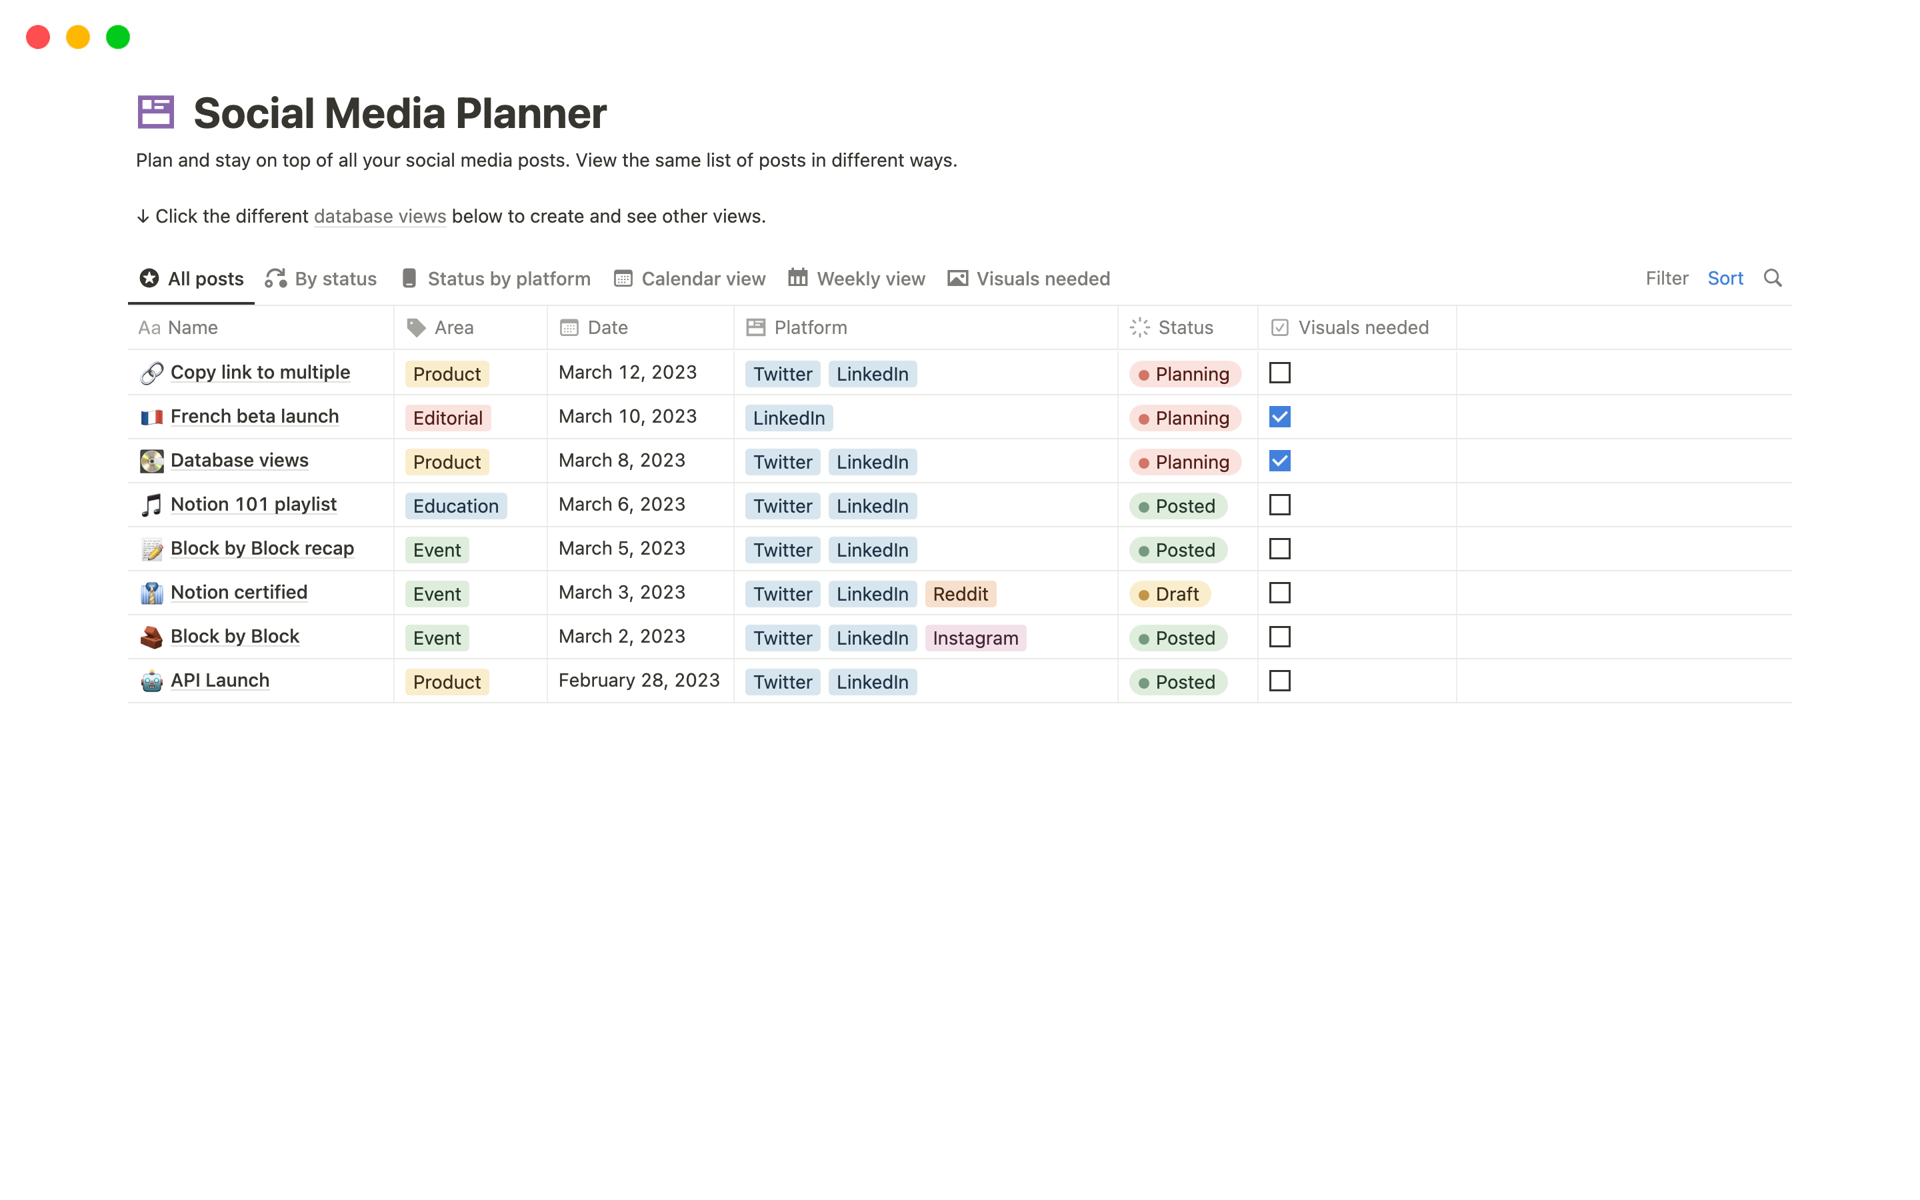 Stay organized and on top of your social media posts with our Social Media Planner template. Easily view and manage your posts in various formats.